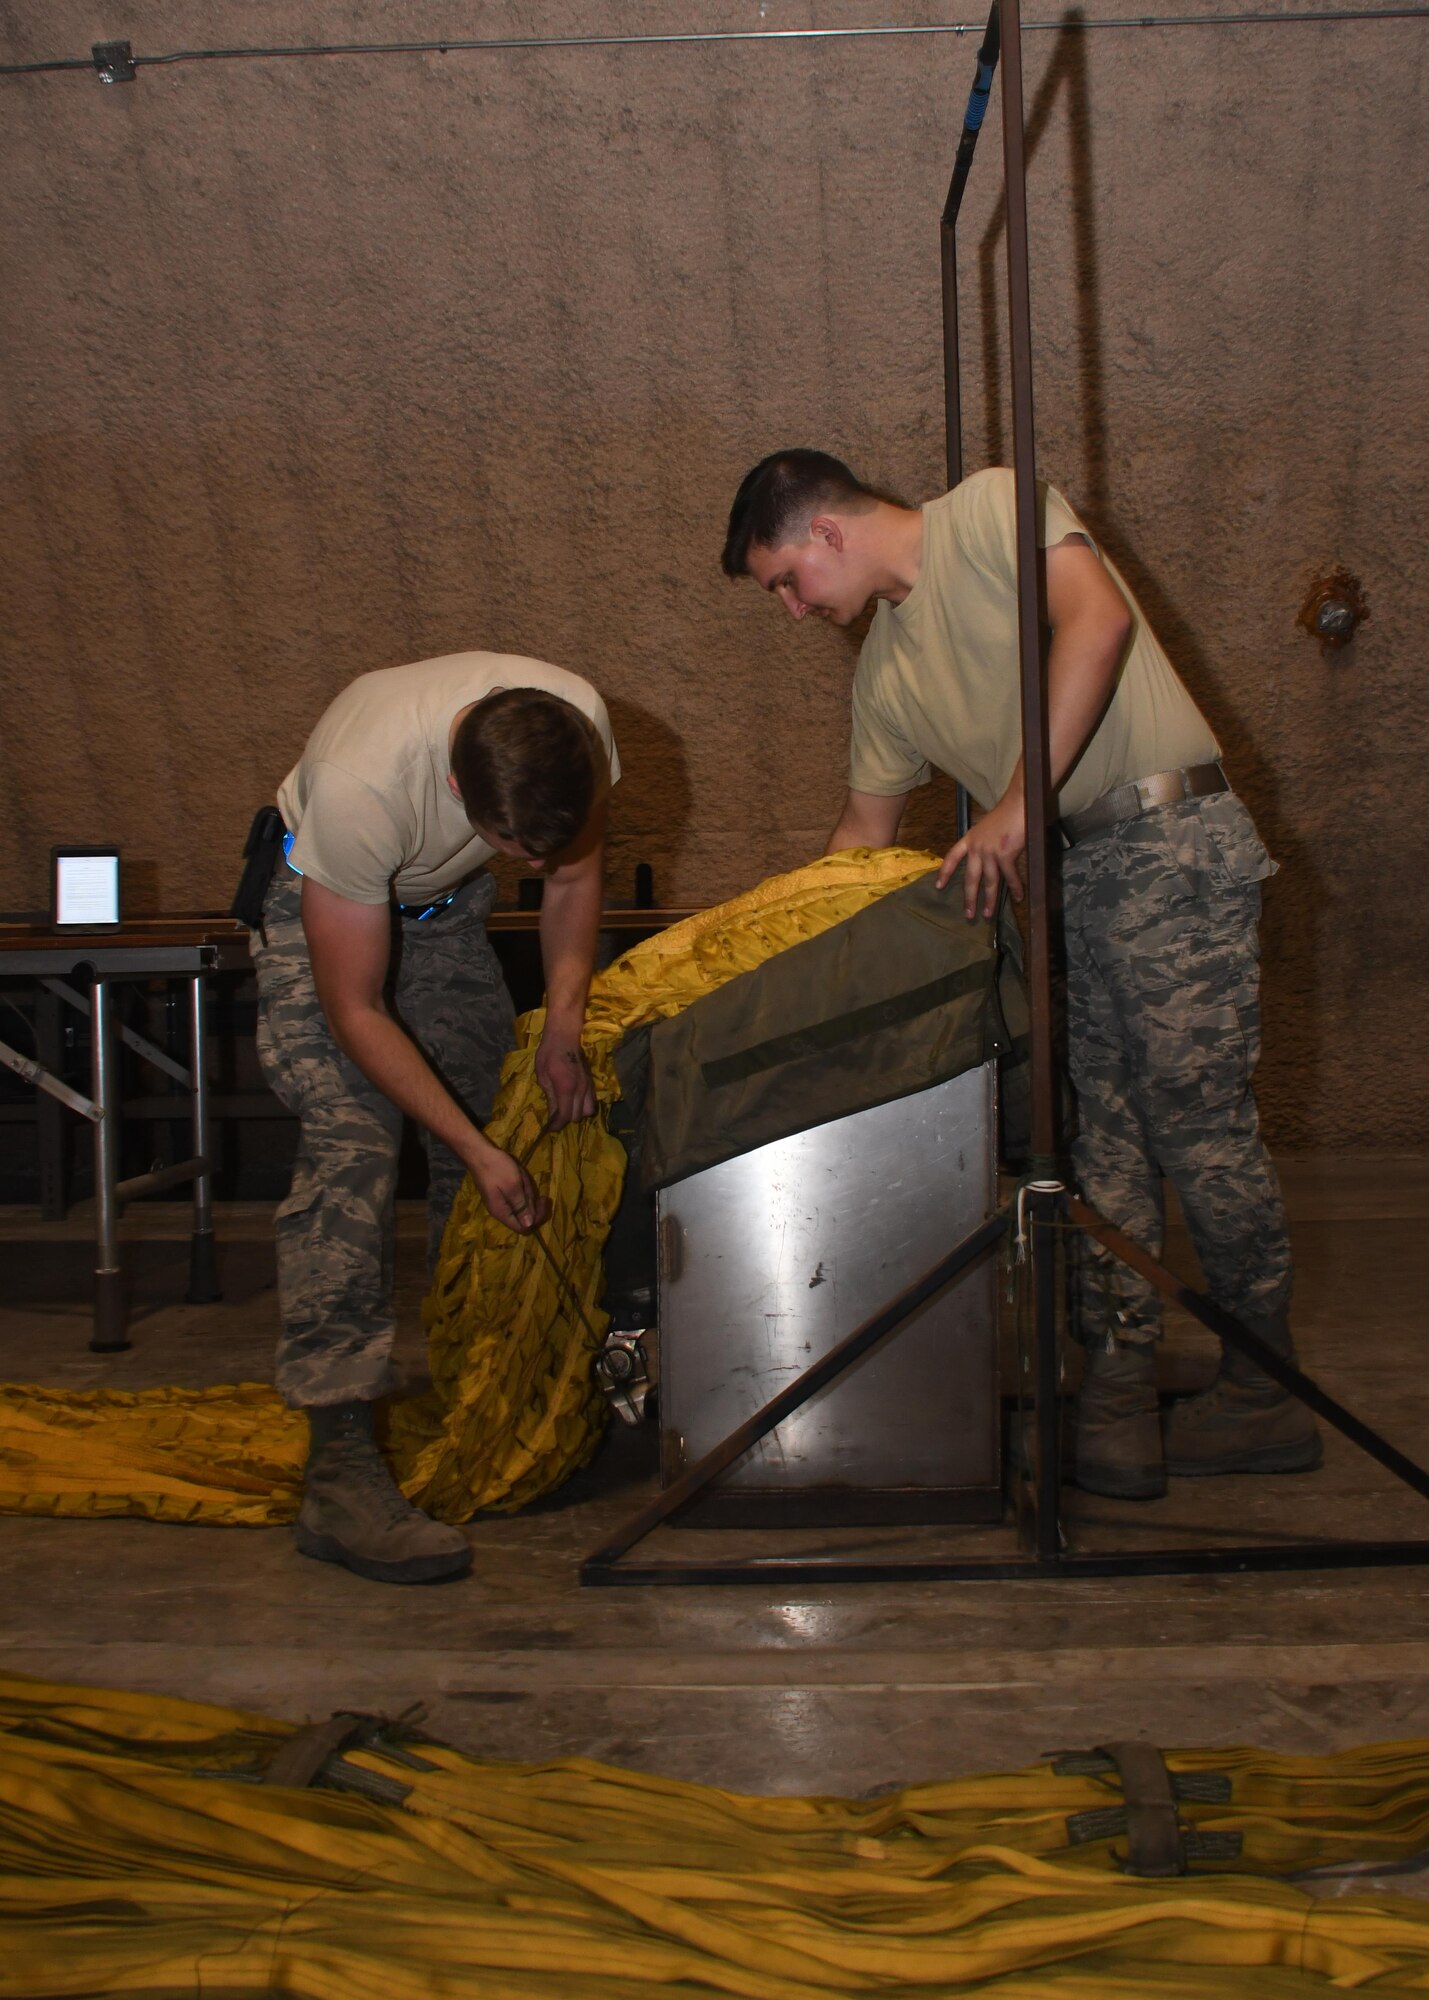 U.S. Air Force Airman 1st Class Eric Hornbeck, left, and Senior Airman Jack McDonald, right, 379th Expeditionary Operations Support Squadron aircrew flight equipment technicians, pack a drag parachute into its deployment bag at Al Udeid Air Base, Qatar, Nov. 30, 2016. These drag parachutes are deployed to help aircraft slow down, and are inspected after each use for tears, burns, broken threads or holes in the canopy. (U.S. Air Force photo by Senior Airman Miles Wilson)